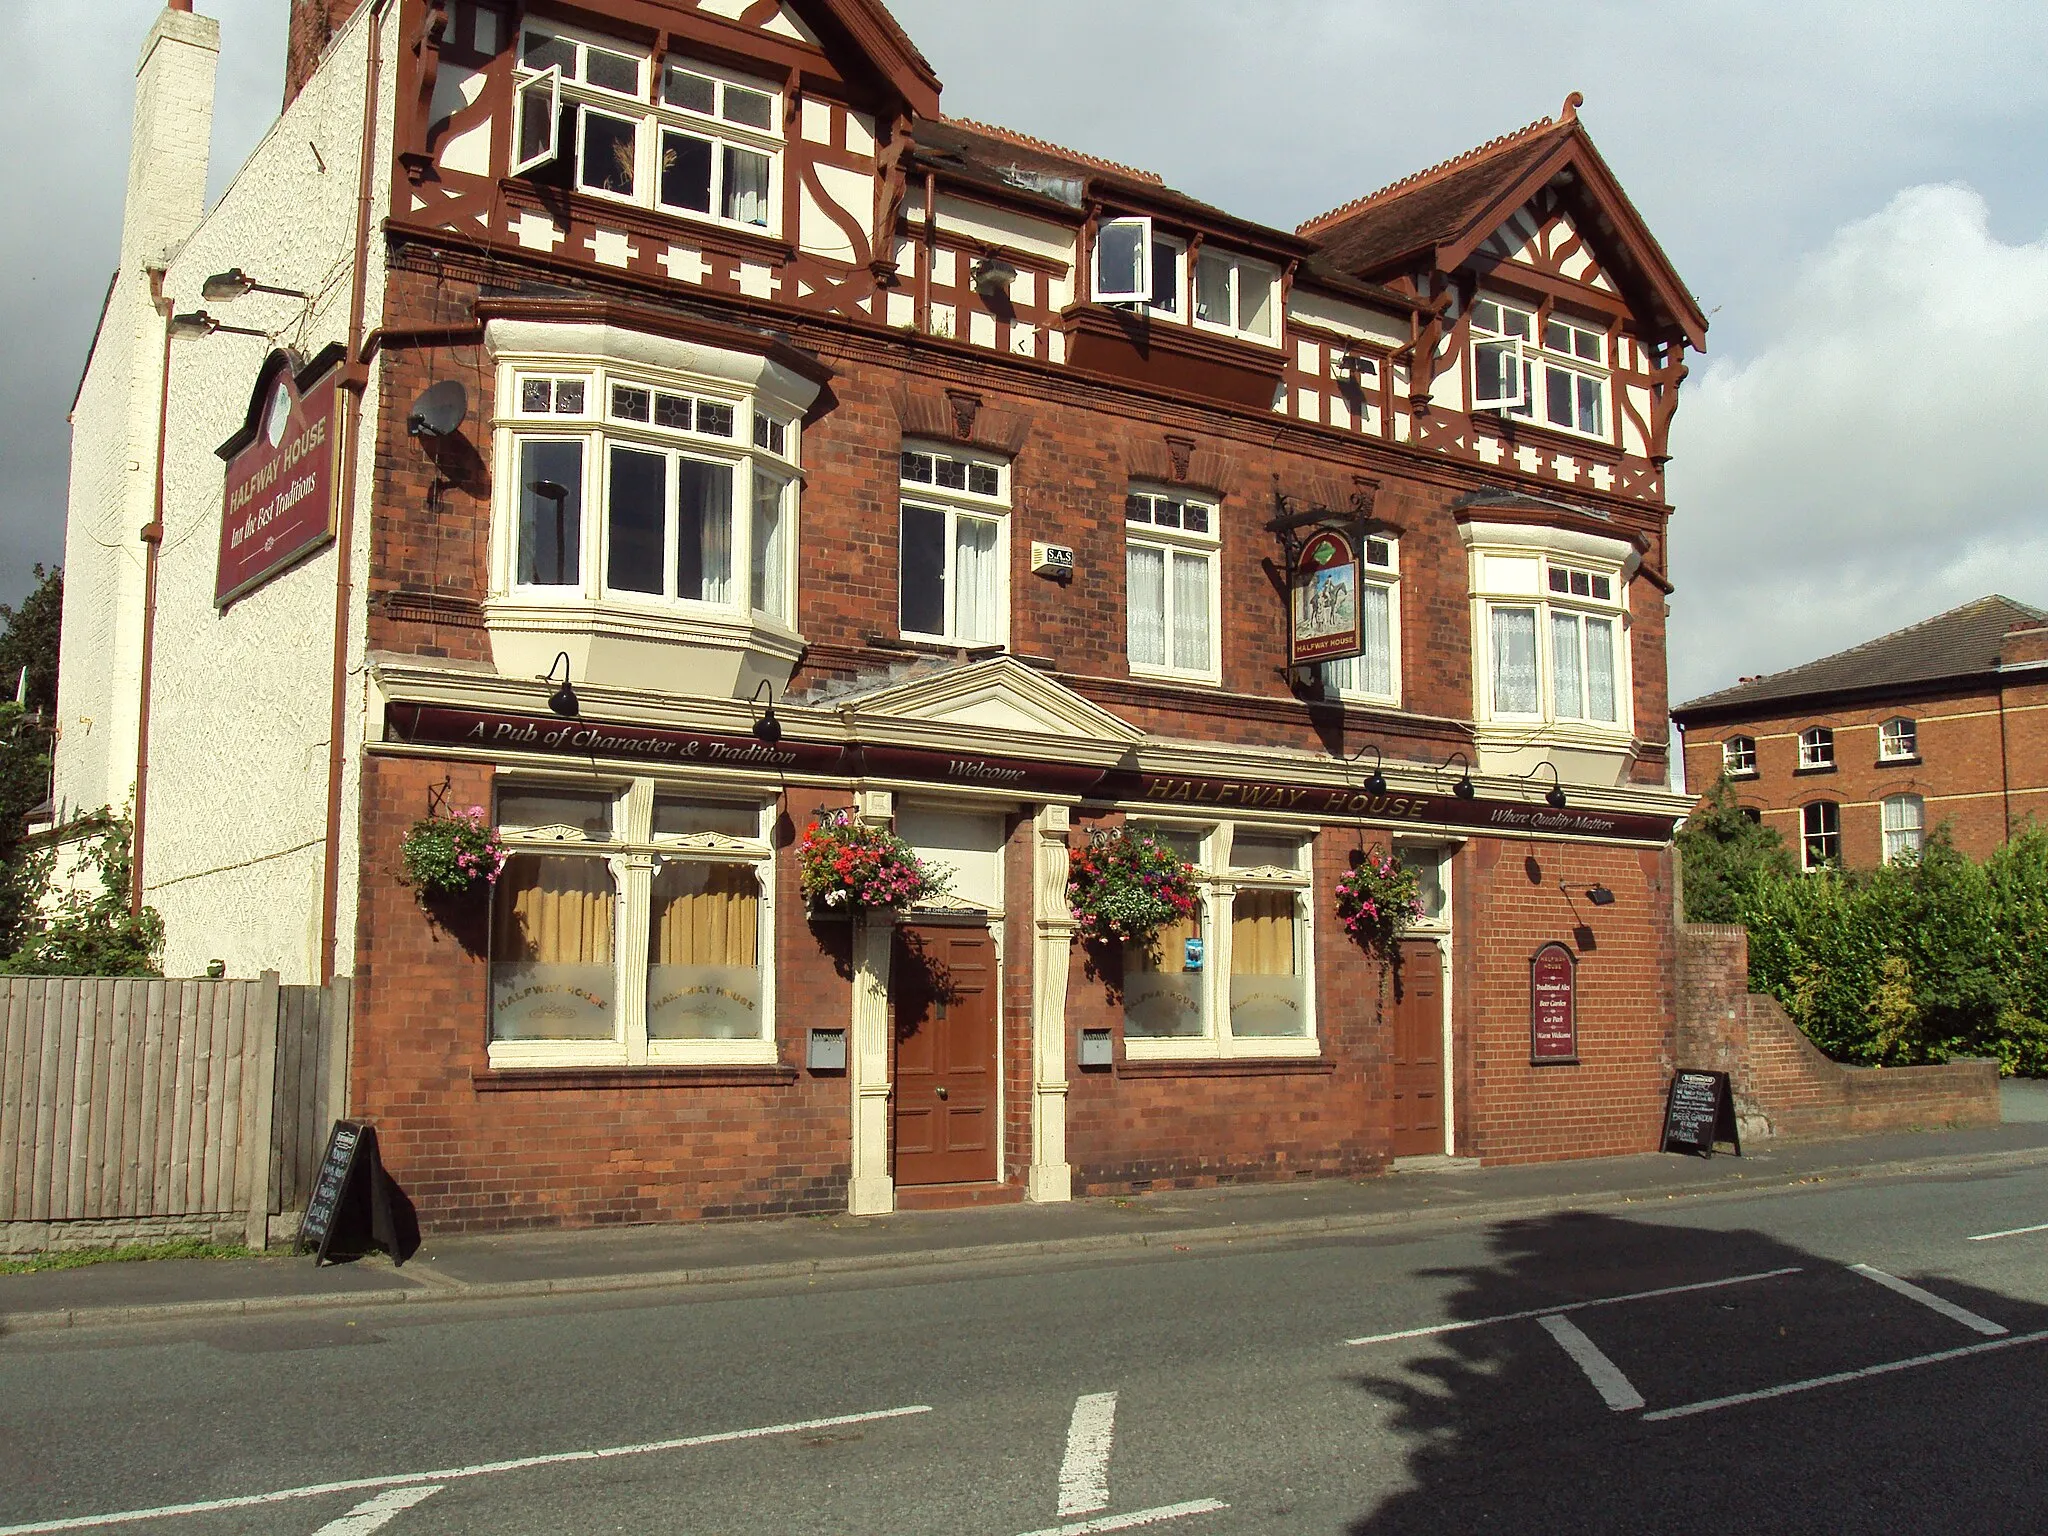 Photo showing: Halfway House pub on the A41 Chester Road at Childer Thornton, Wirral, Cheshire, England. This pub is halfway between Birkenhead and Chester.